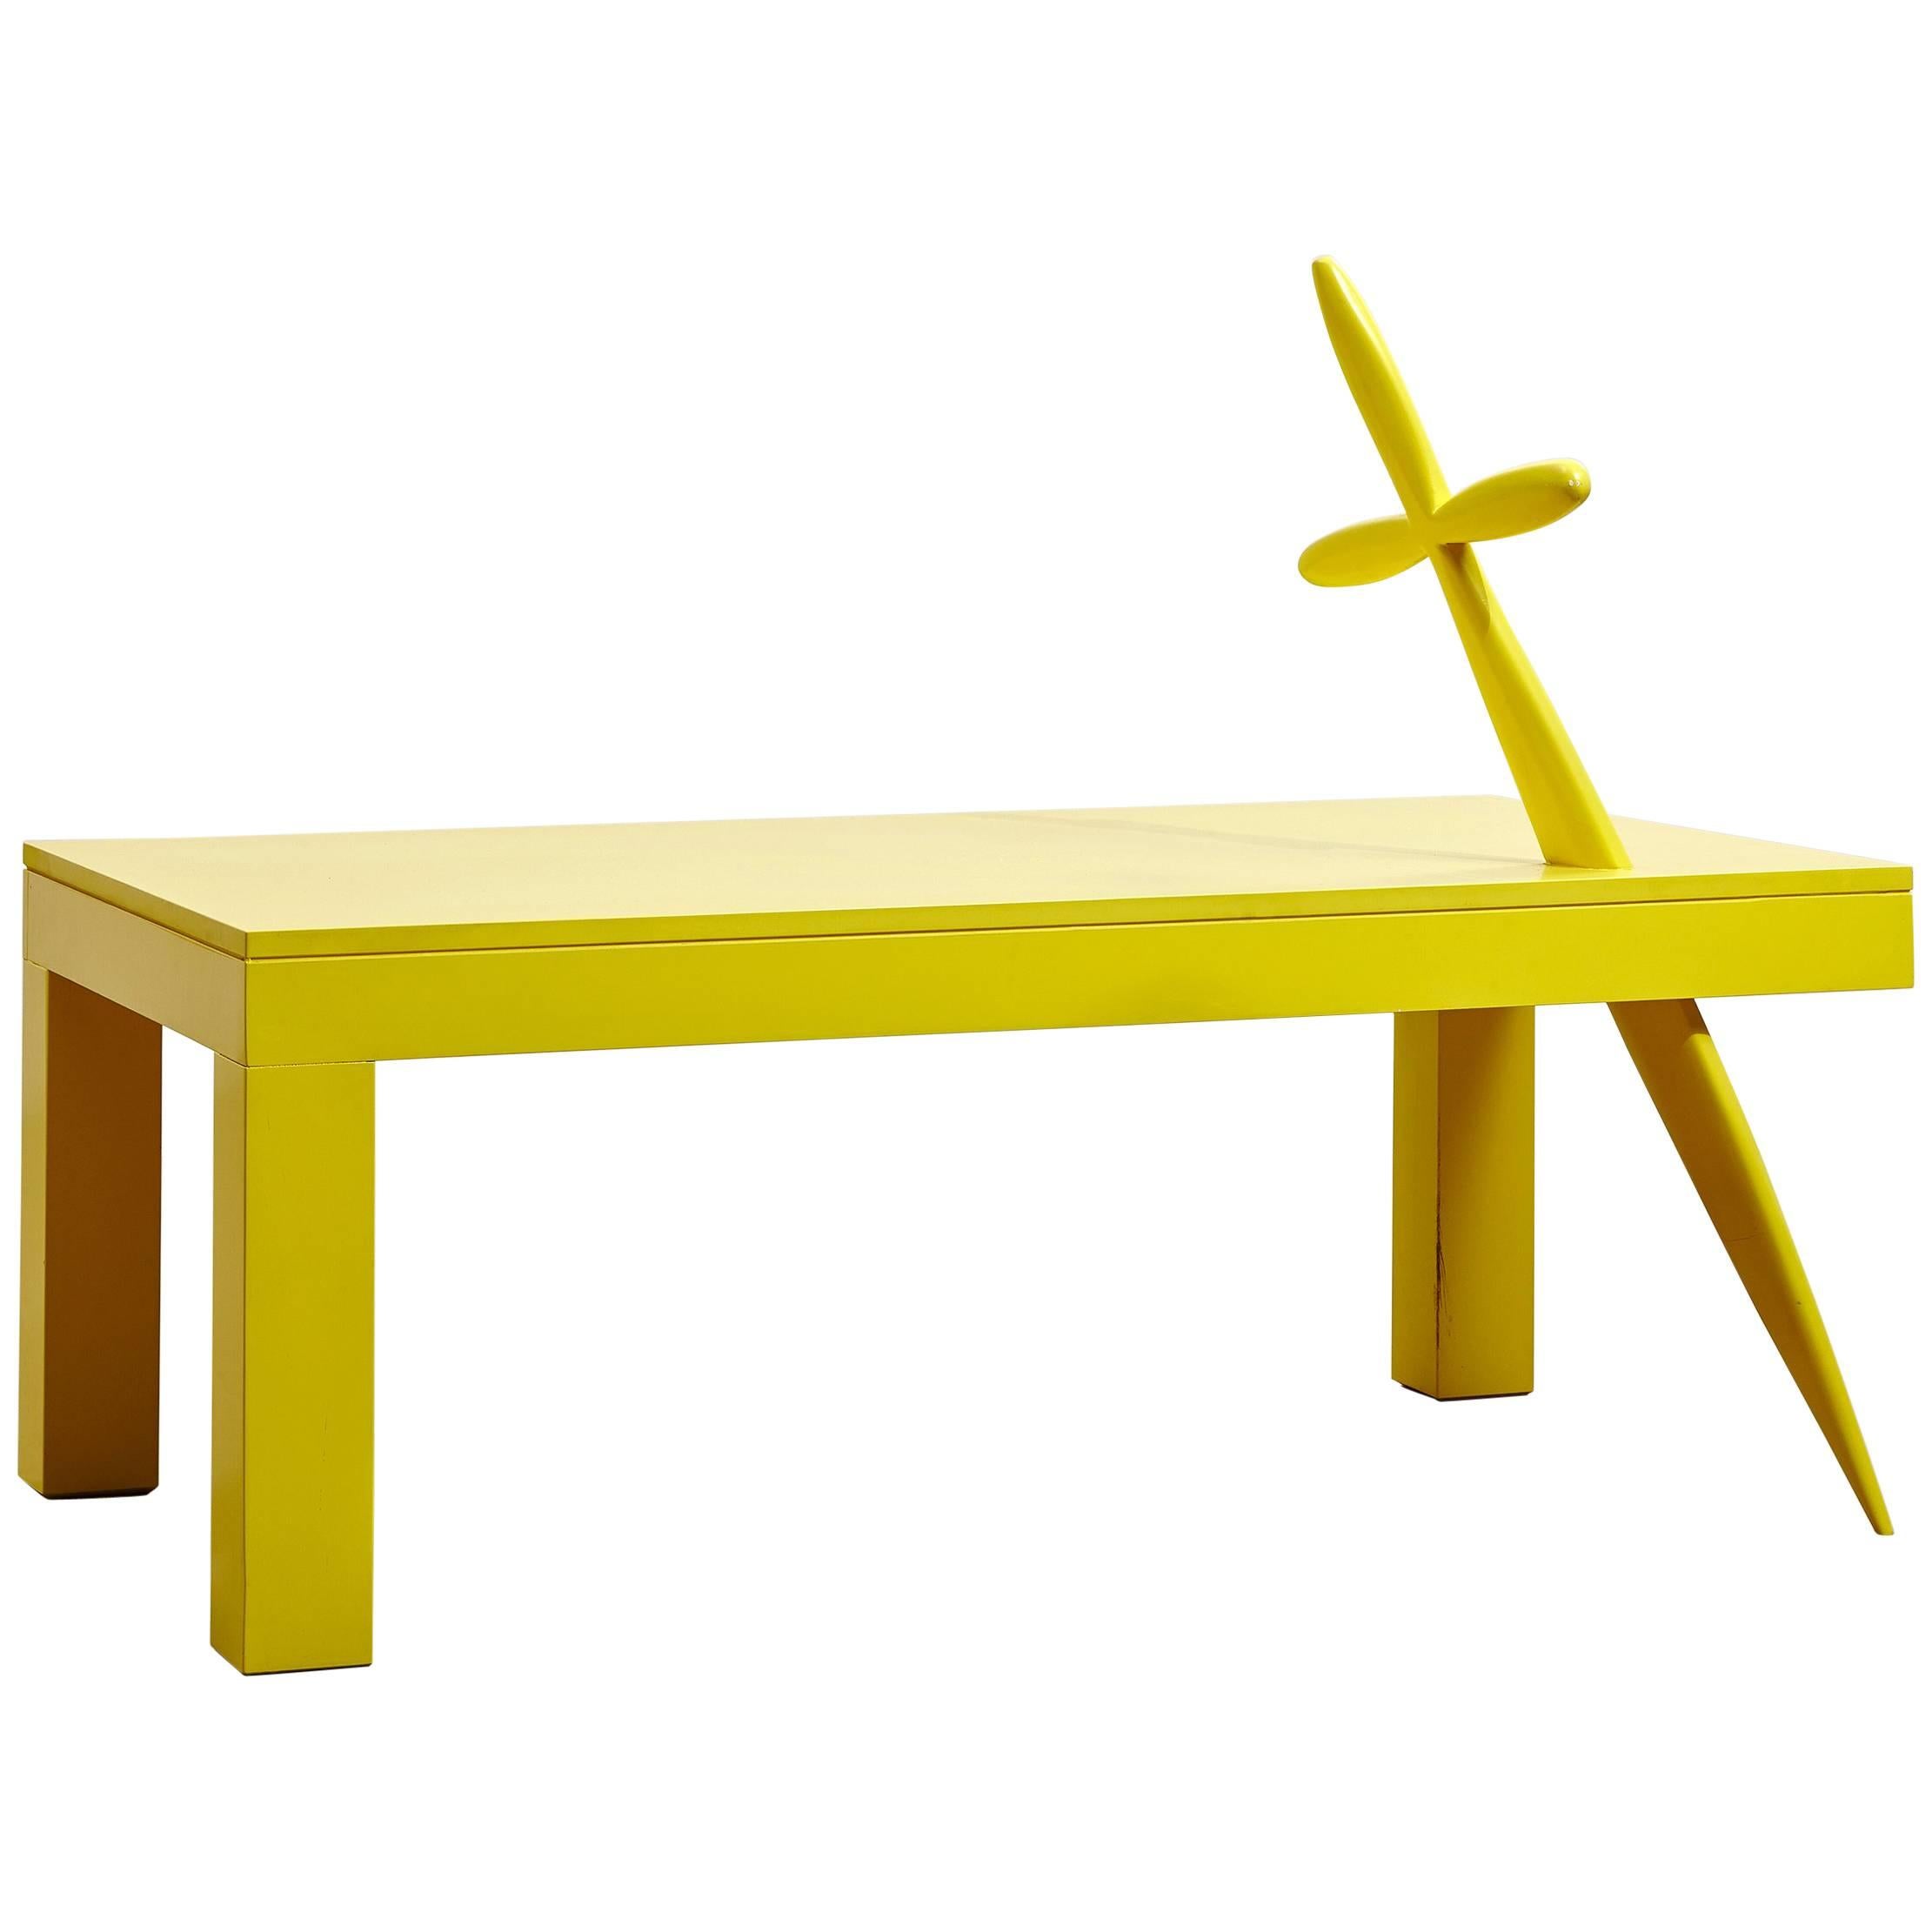 "Heroes" Lacquered Wood Console Table by Alberto Biagetti, 1999